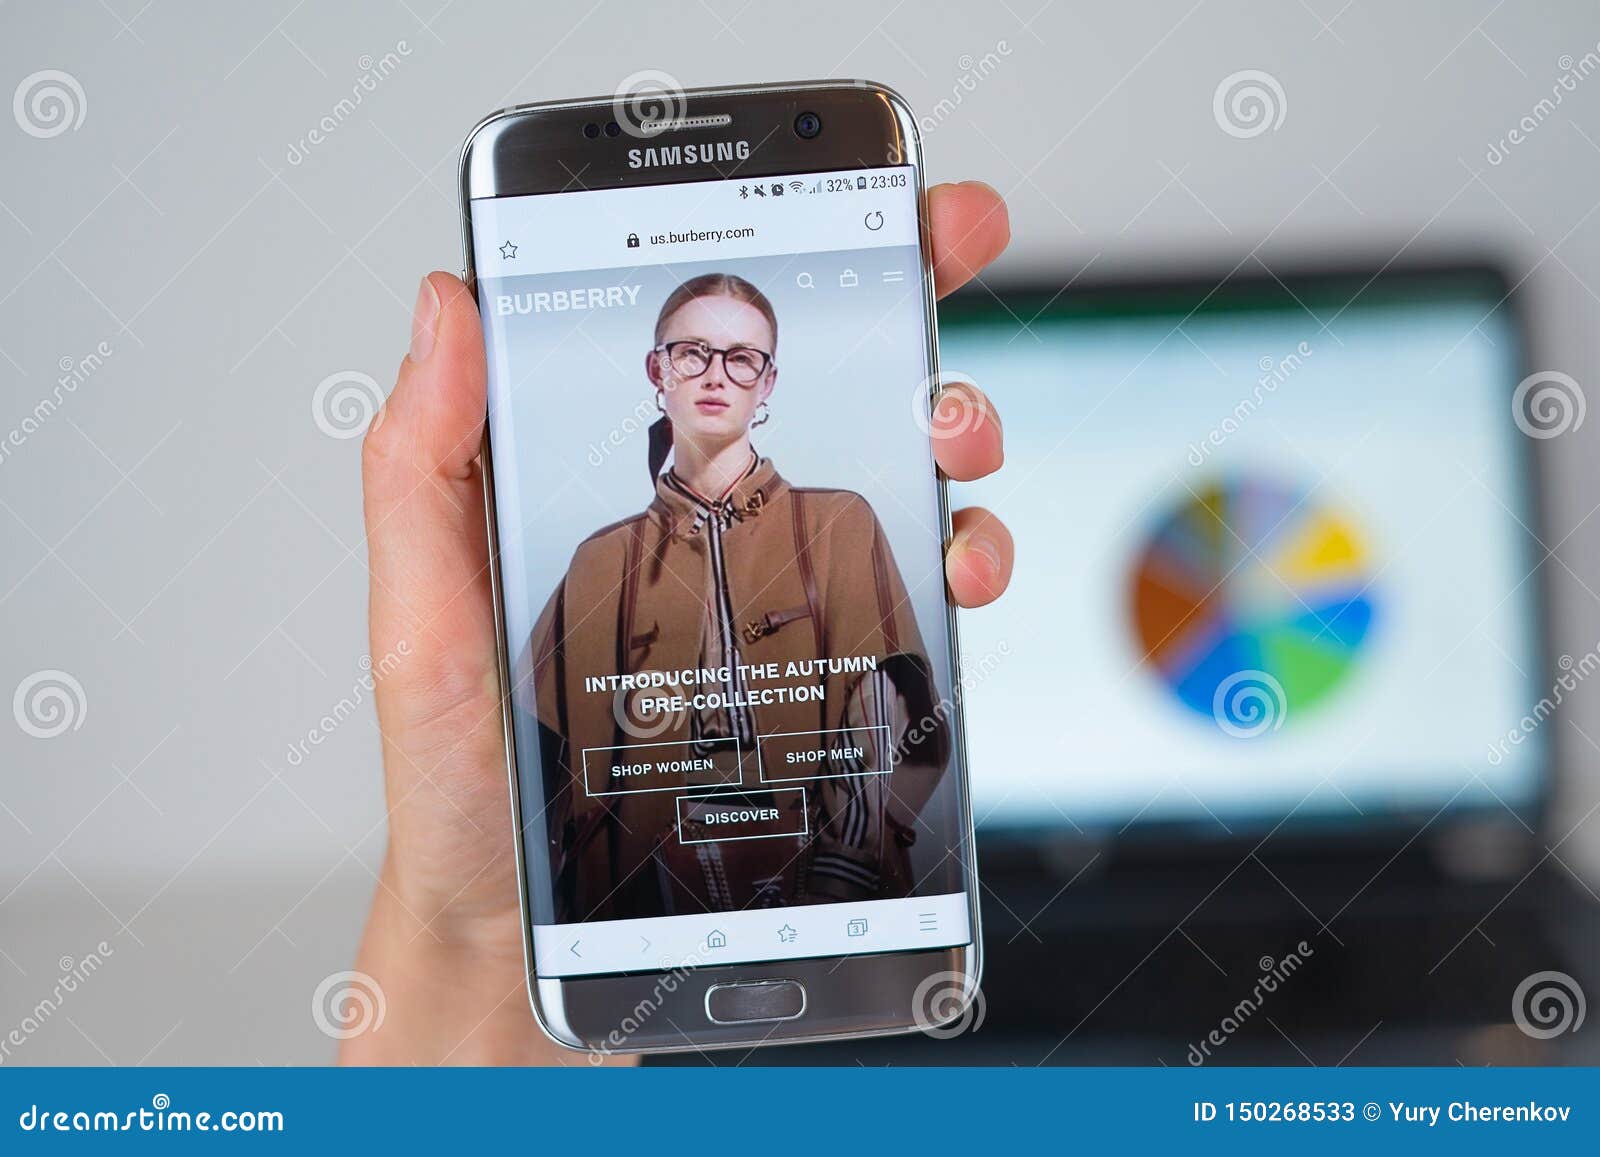 Site of Burberry Company on Phone Screen Editorial Stock Photo - Image of company, browser: 150268533